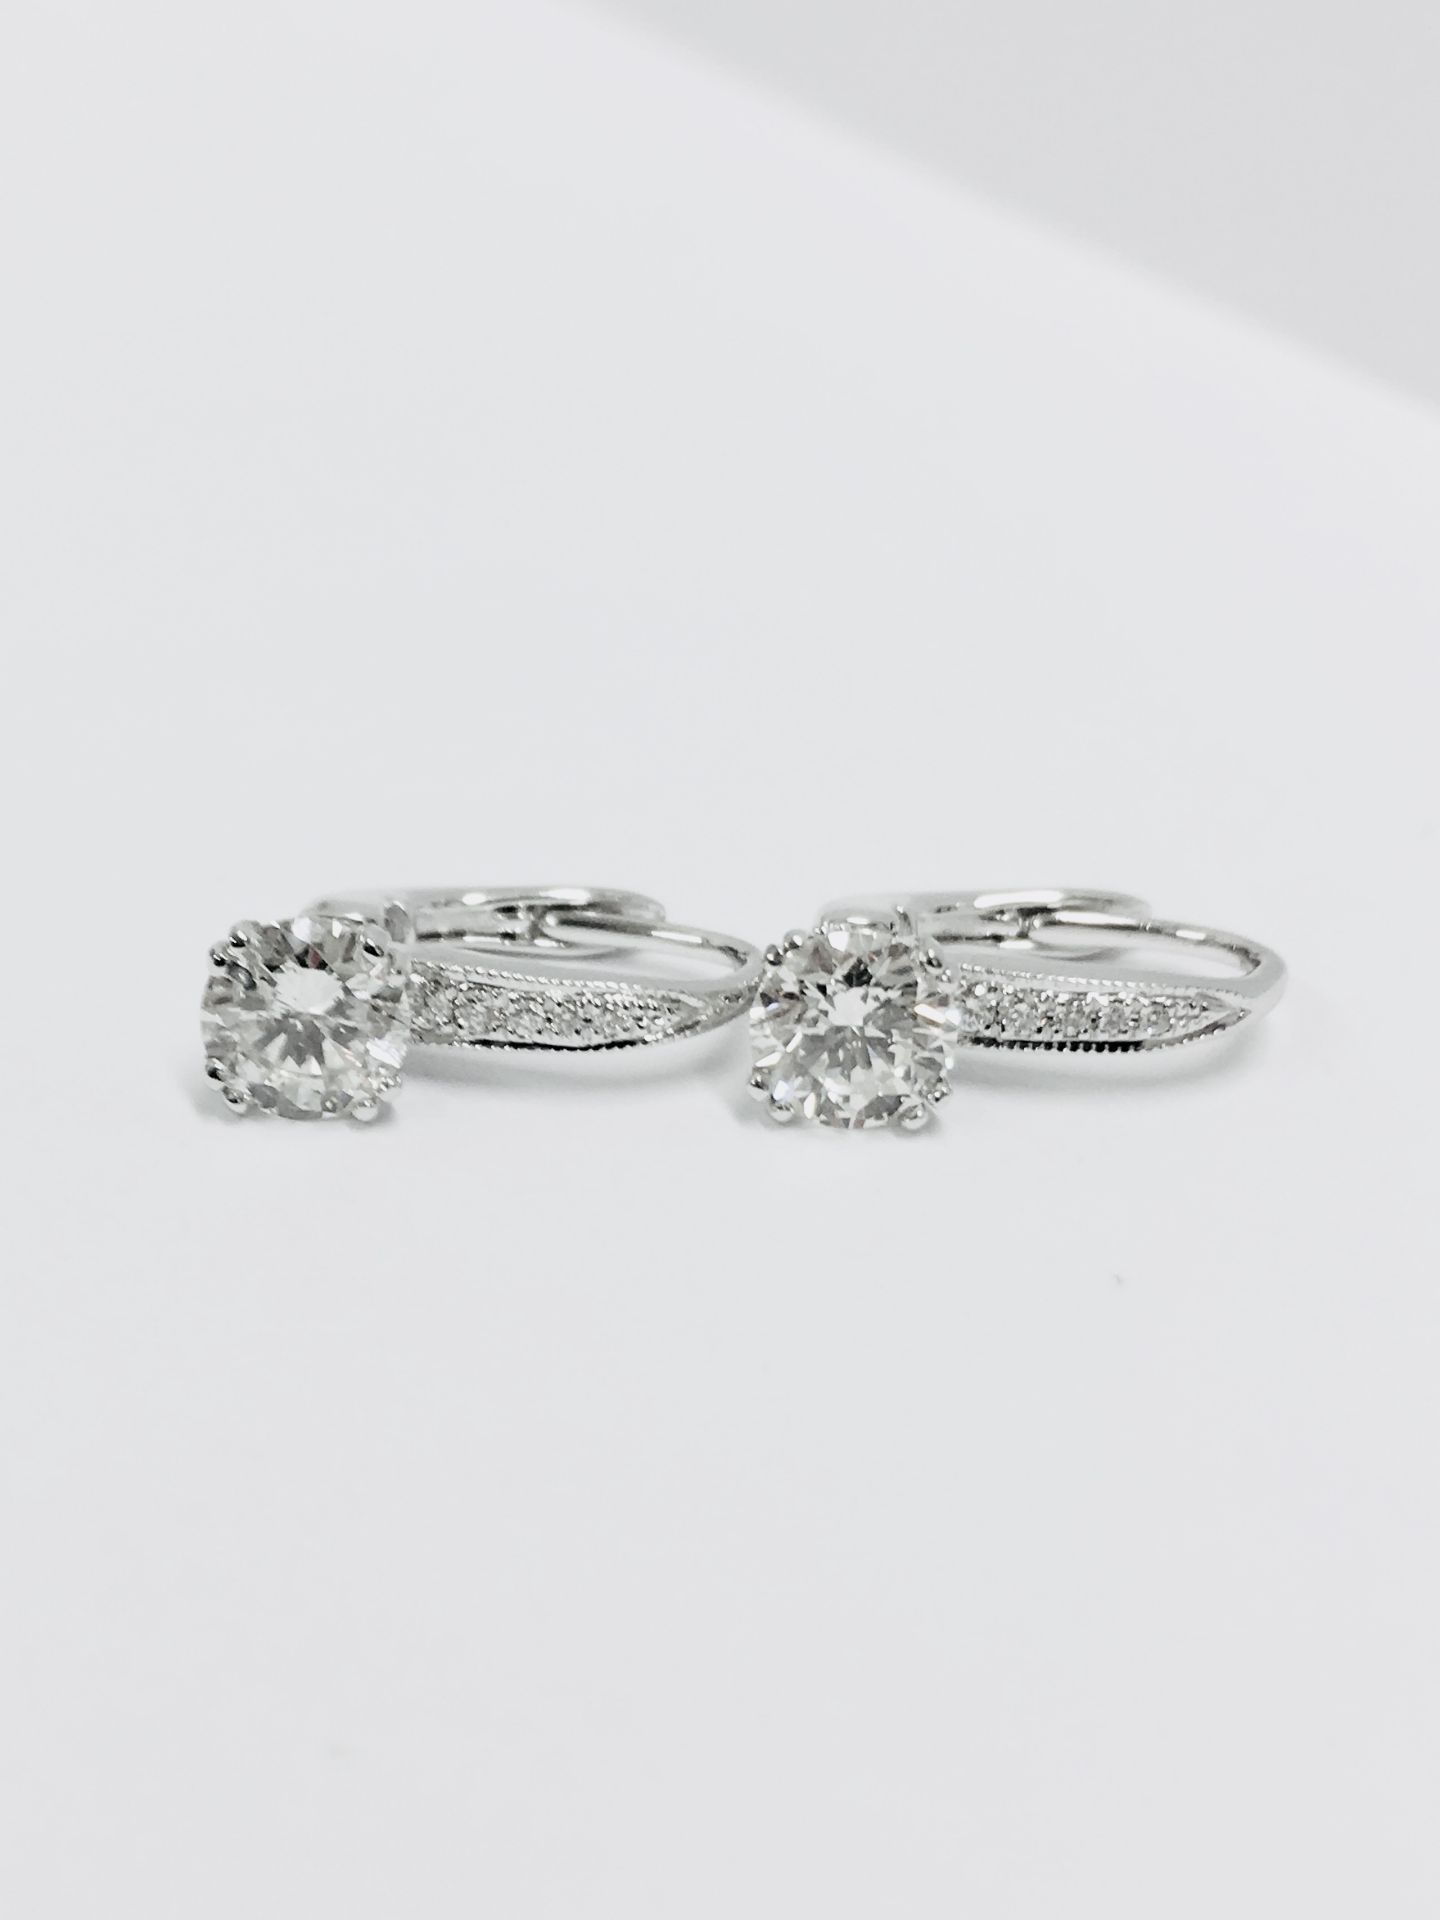 18ct white gold hoop style earrings with hinge fastners. 2 x 0.50ct Brilliant cut diamonds, i colour - Image 2 of 5